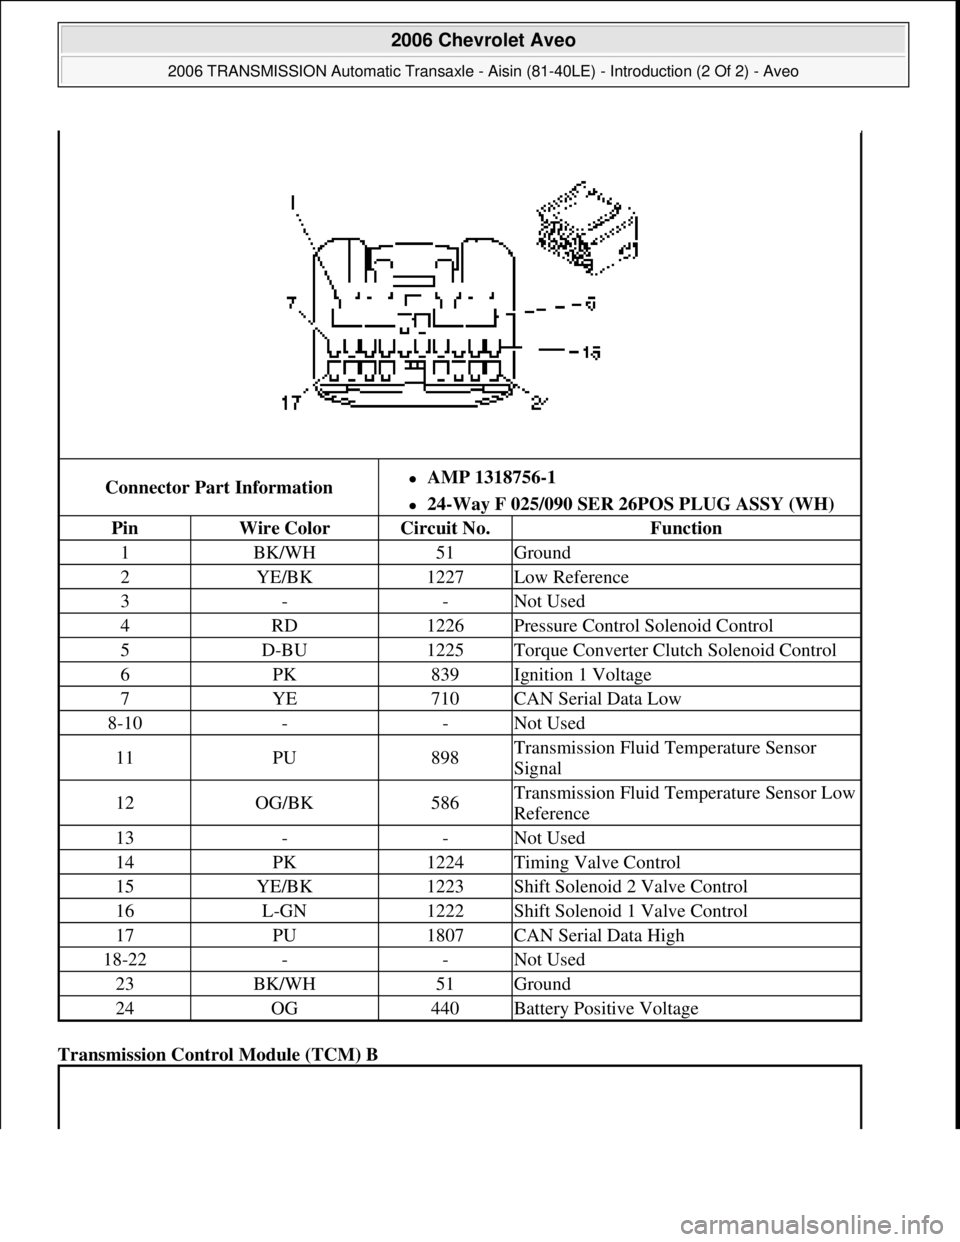 CHEVROLET AVEO 2002  Service Repair Manual Transmission Control Module (TCM) B 
Connector Part InformationAMP 1318756-1  
24-Way F 025/090 SER 26POS PLUG ASSY (WH)  
PinWire ColorCircuit No.Function
1BK/WH51Ground
2YE/BK1227Low Reference